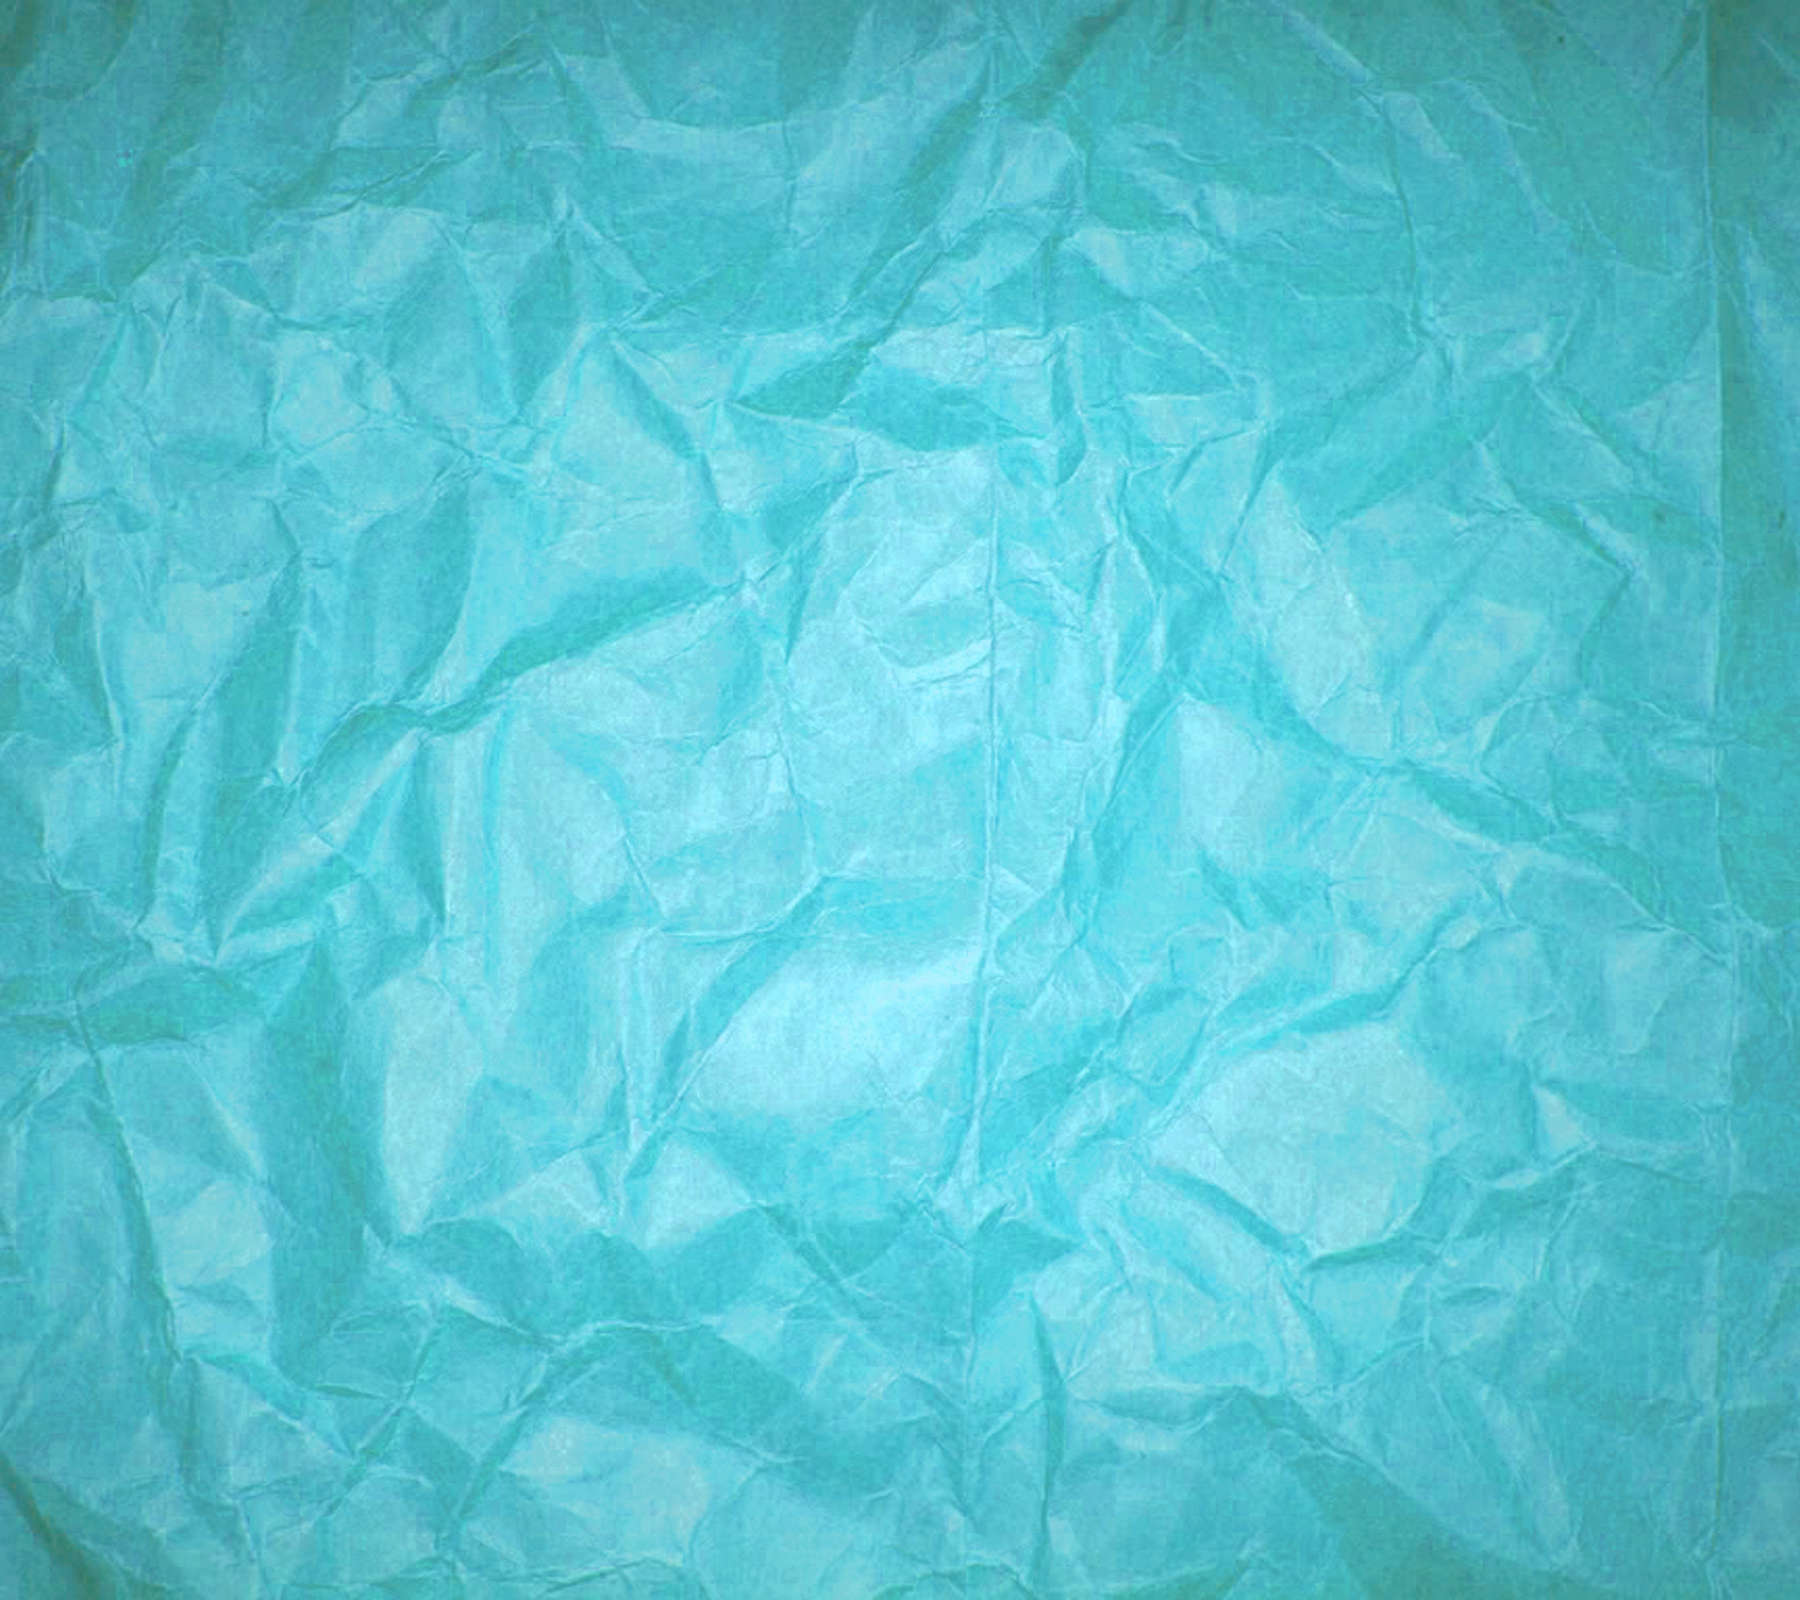 Teal Background Wallpaper image gallery